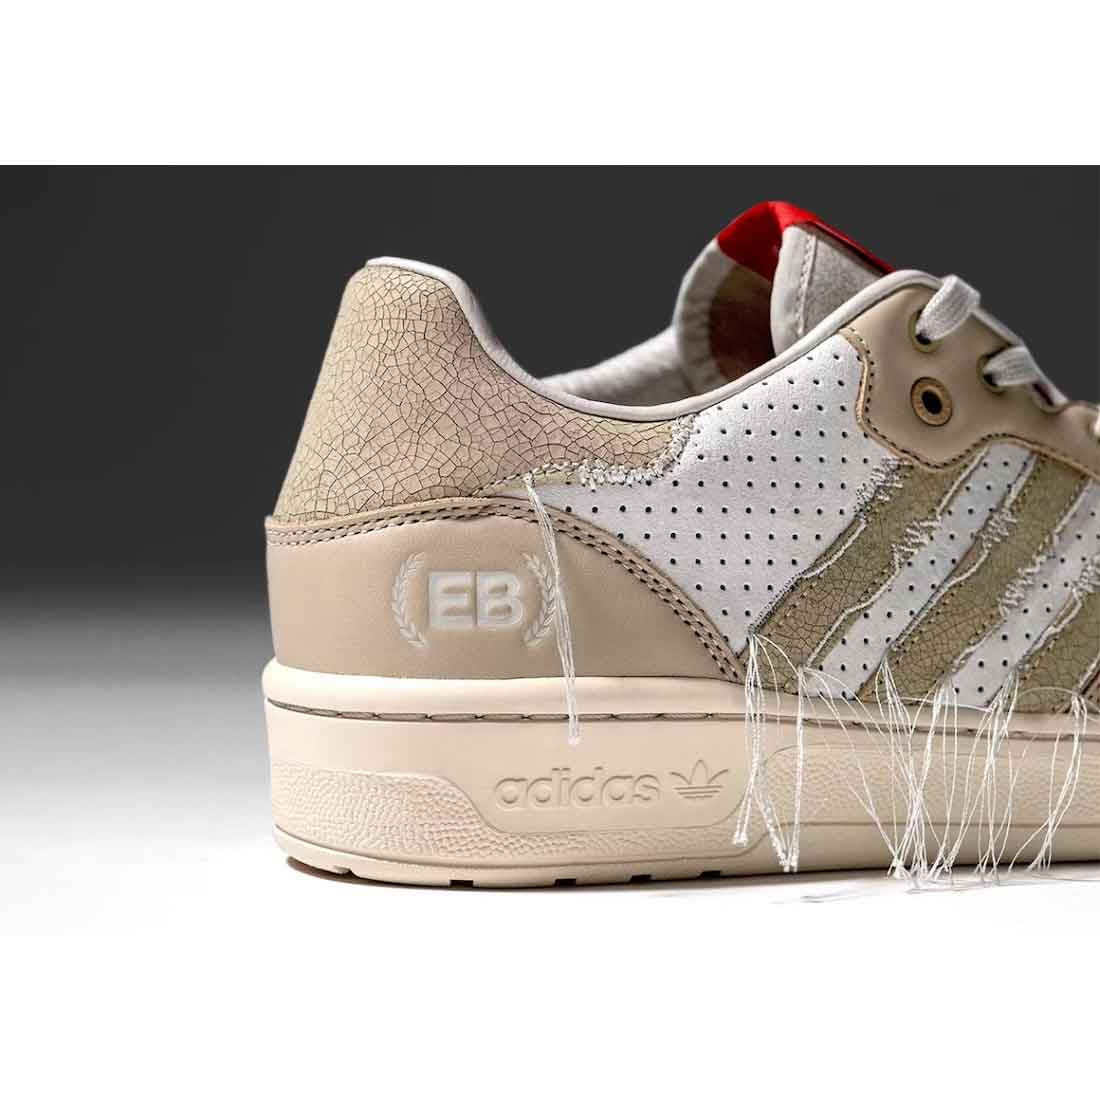 Extra Butter x adidas Rivalry Low "Battle Royale" ID8805